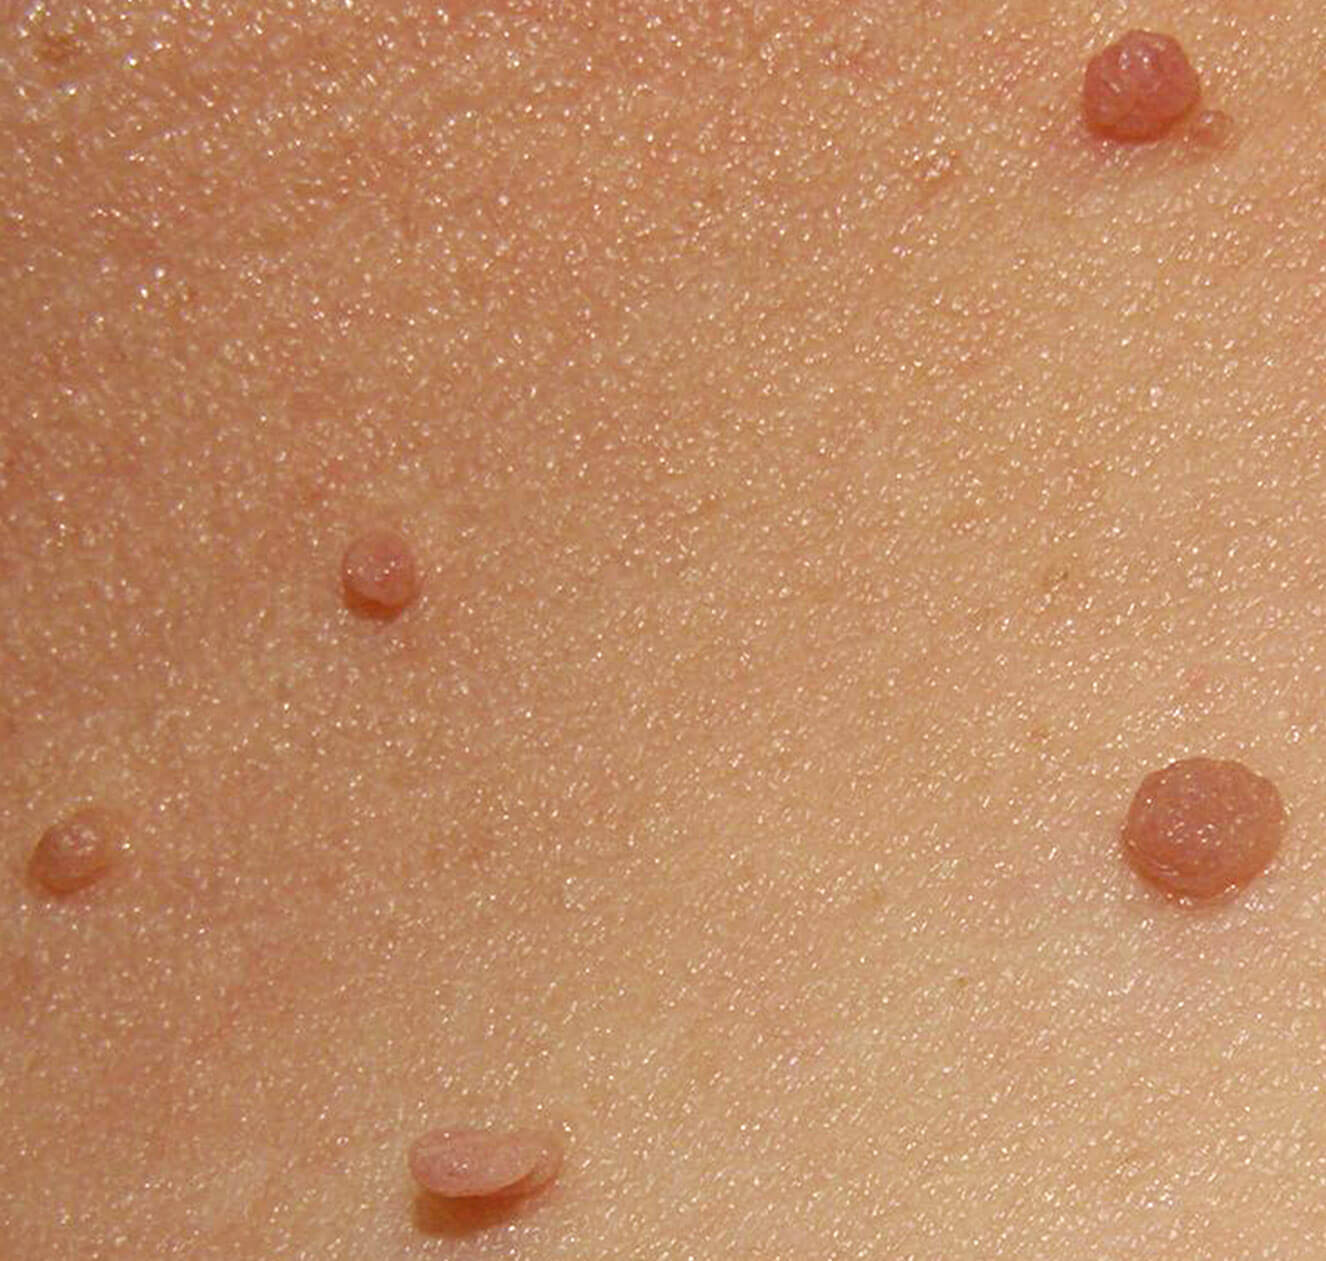 Why do Skin Tags Grow during Pregnancy?